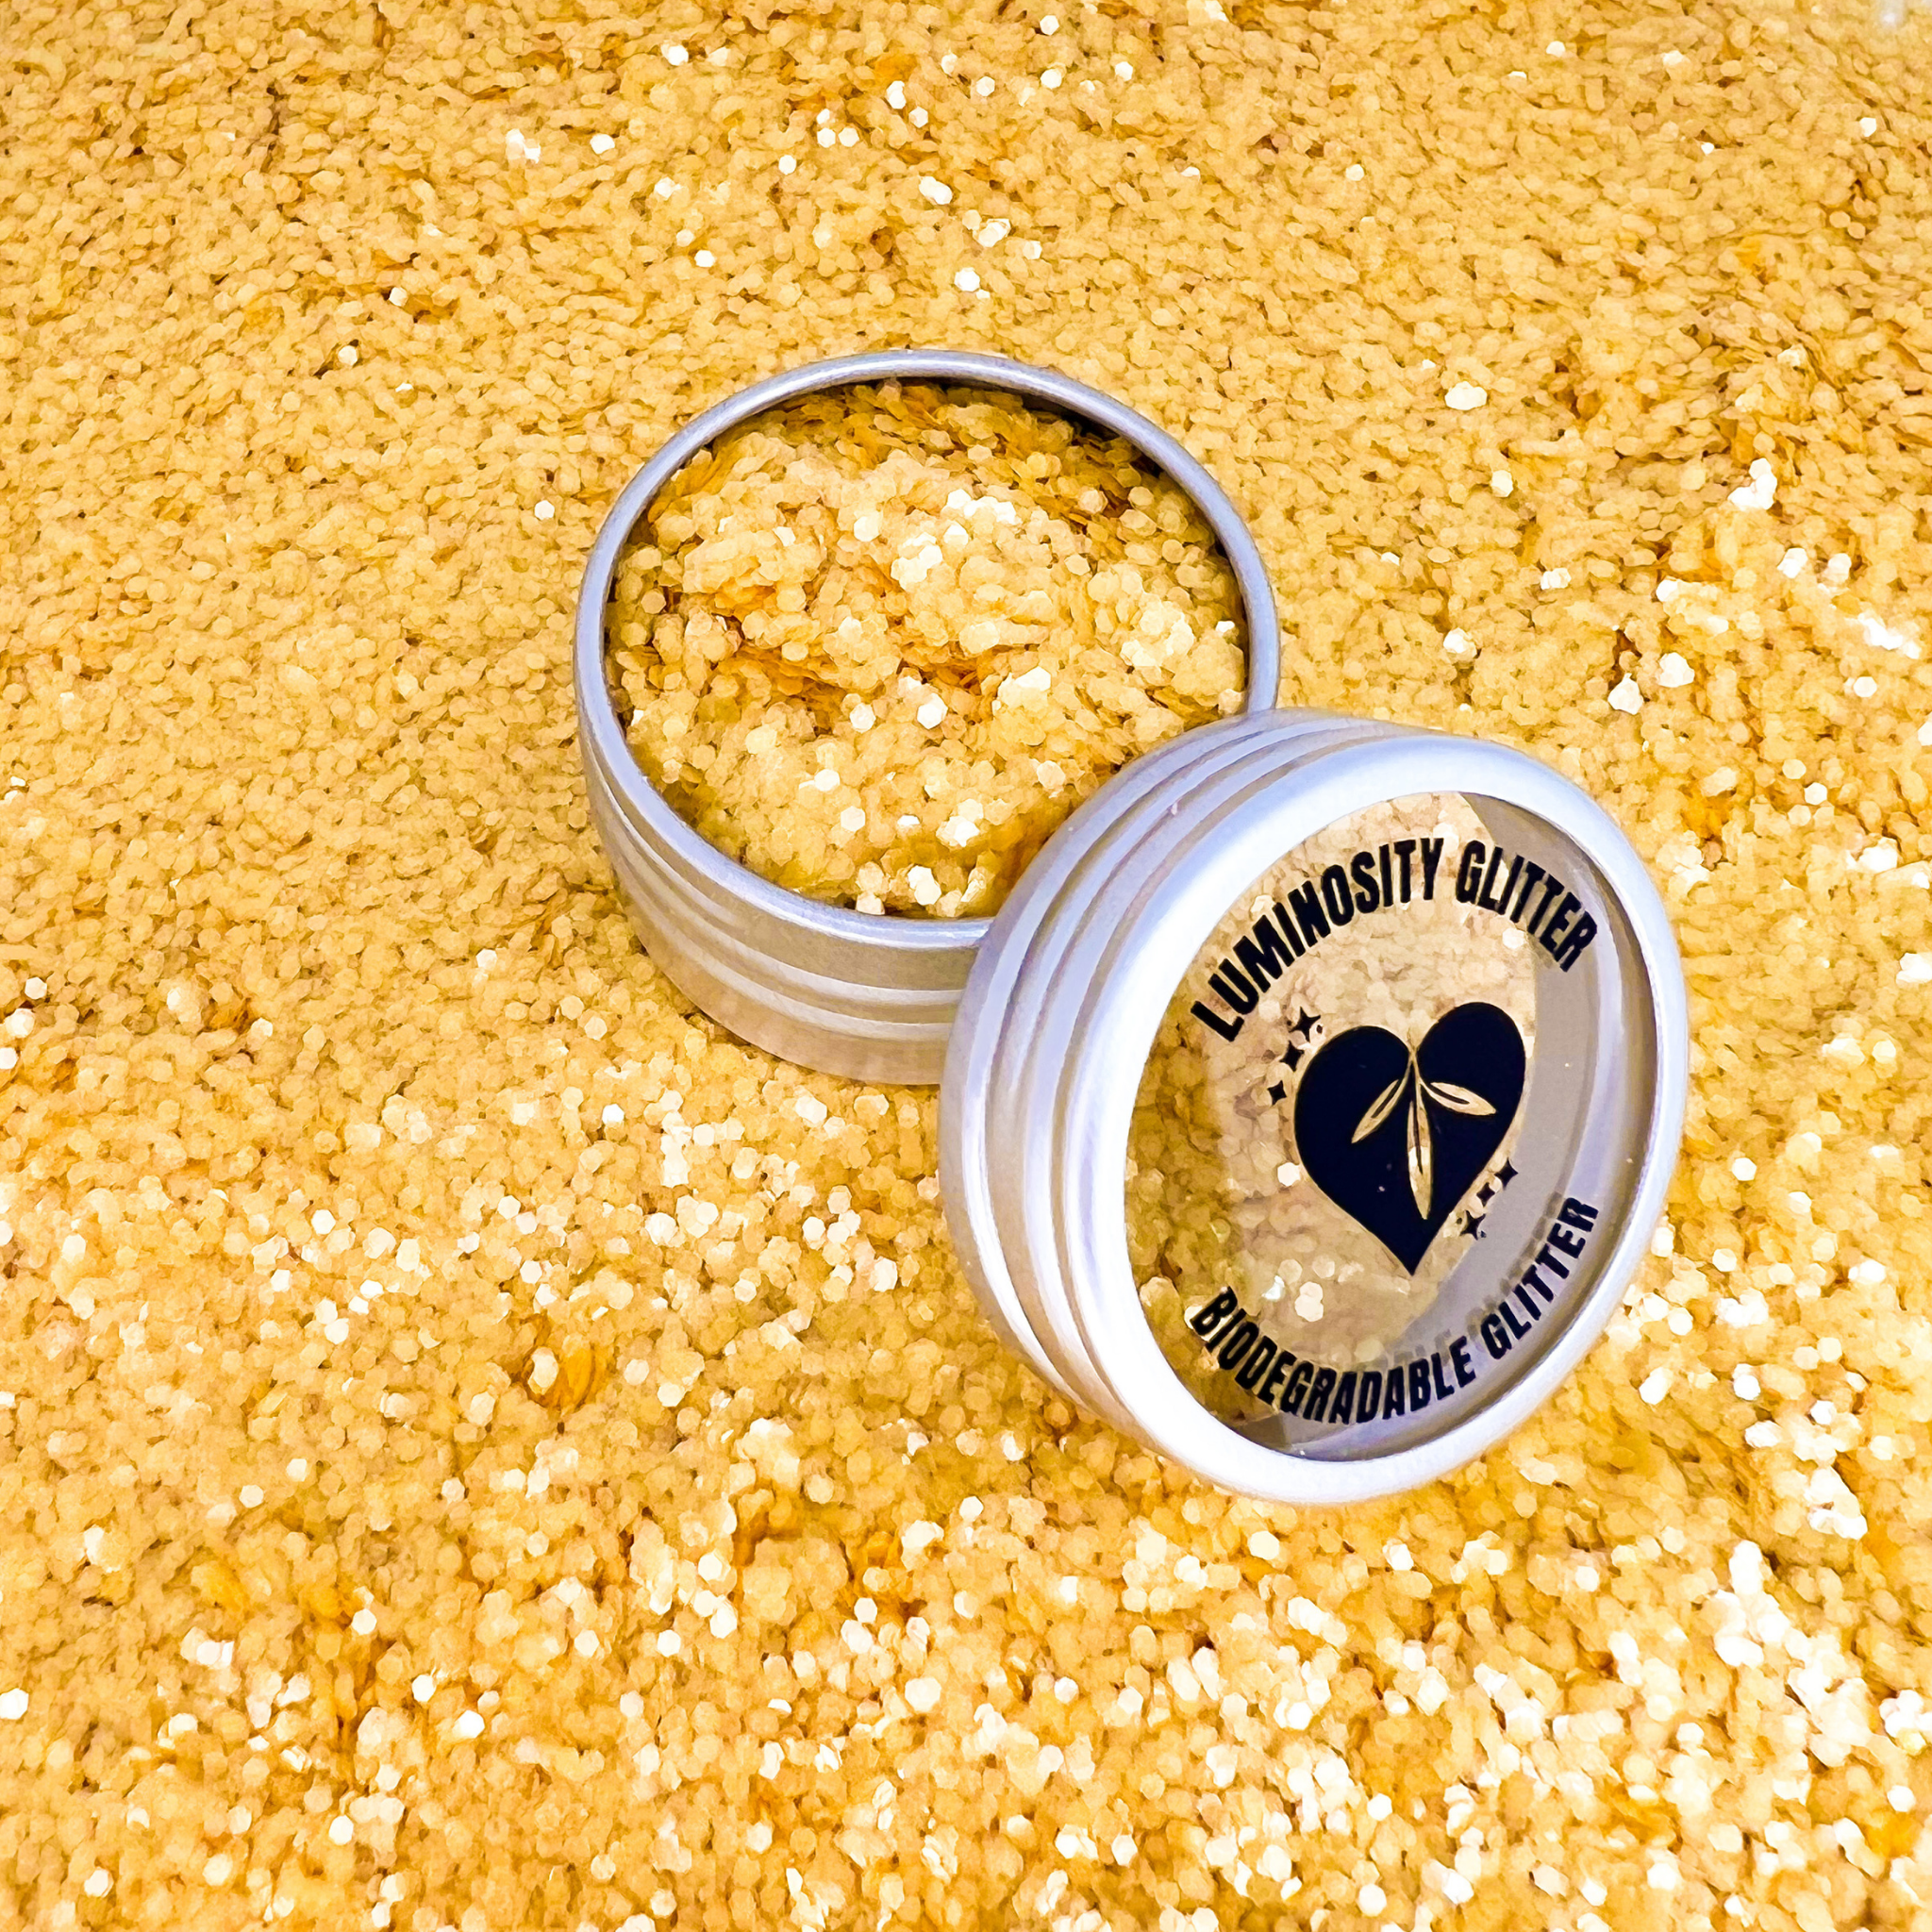 Chunky honey gold biodegradable glitter that is 100% plastic and aluminium free.